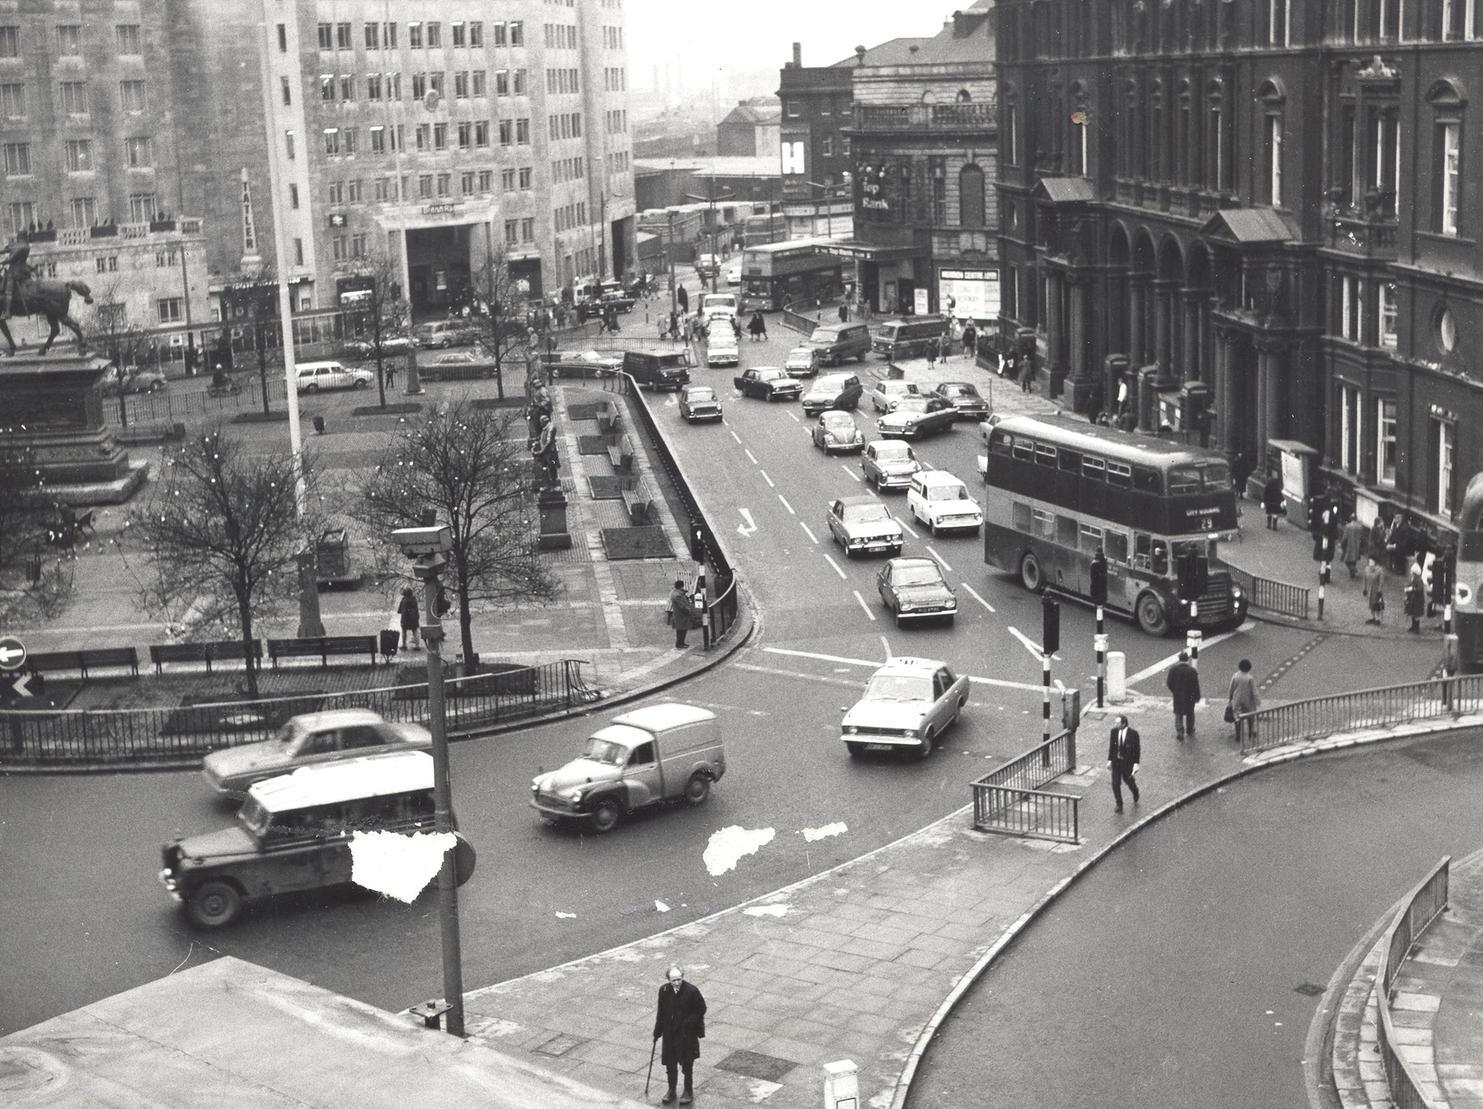 We think this is a view of City Square taken during the 1960s. Do you agree?